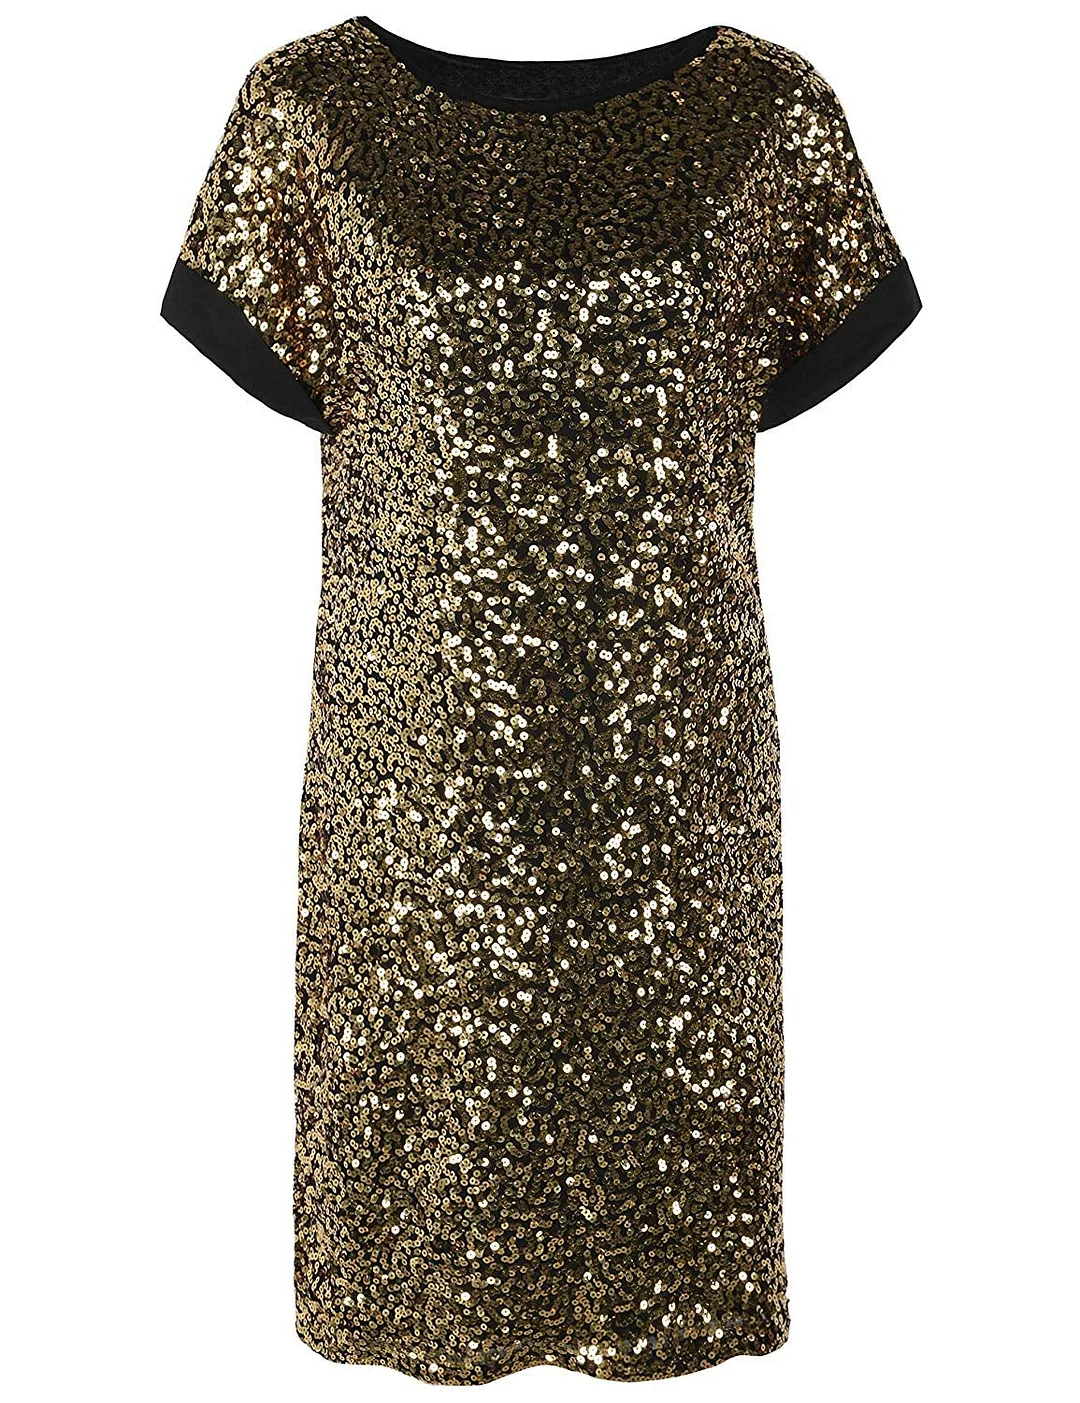 Women's Sequin Cocktail Dress Loose Glitter Shift Party Tunic Dress